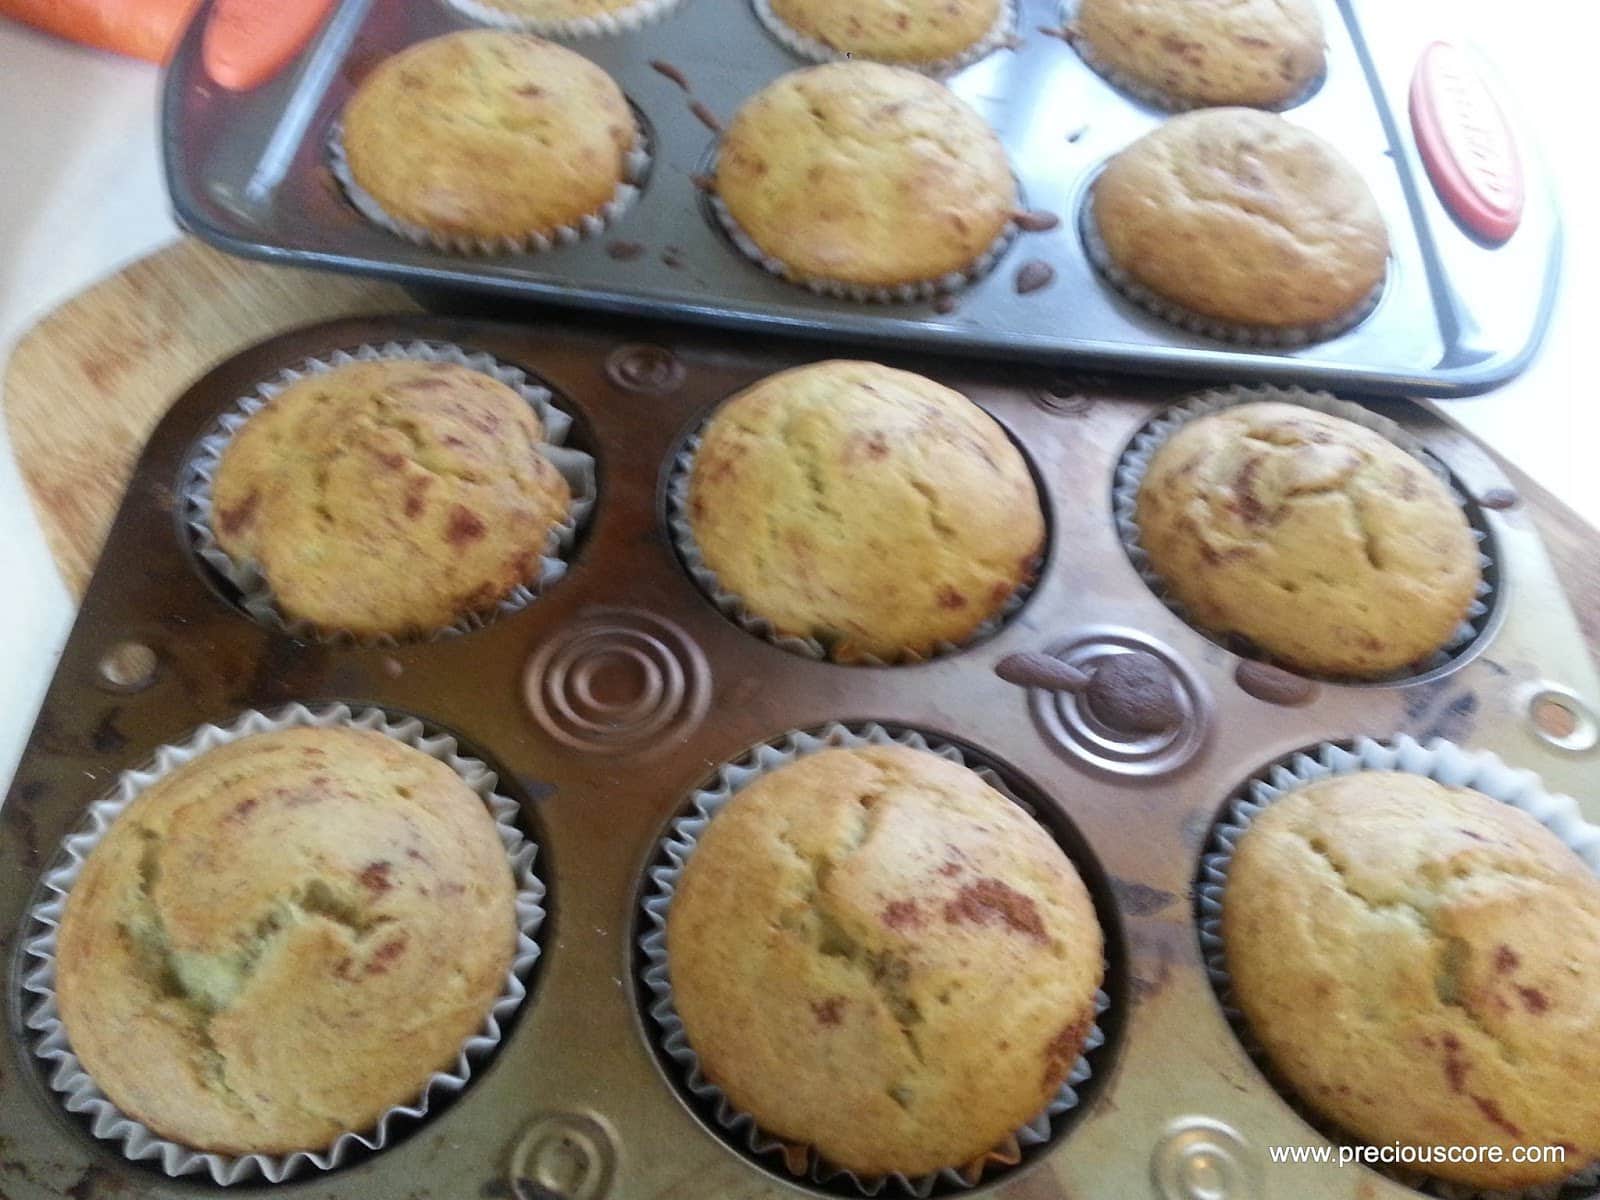 Muffin pans full of Cameroon banana cakes.